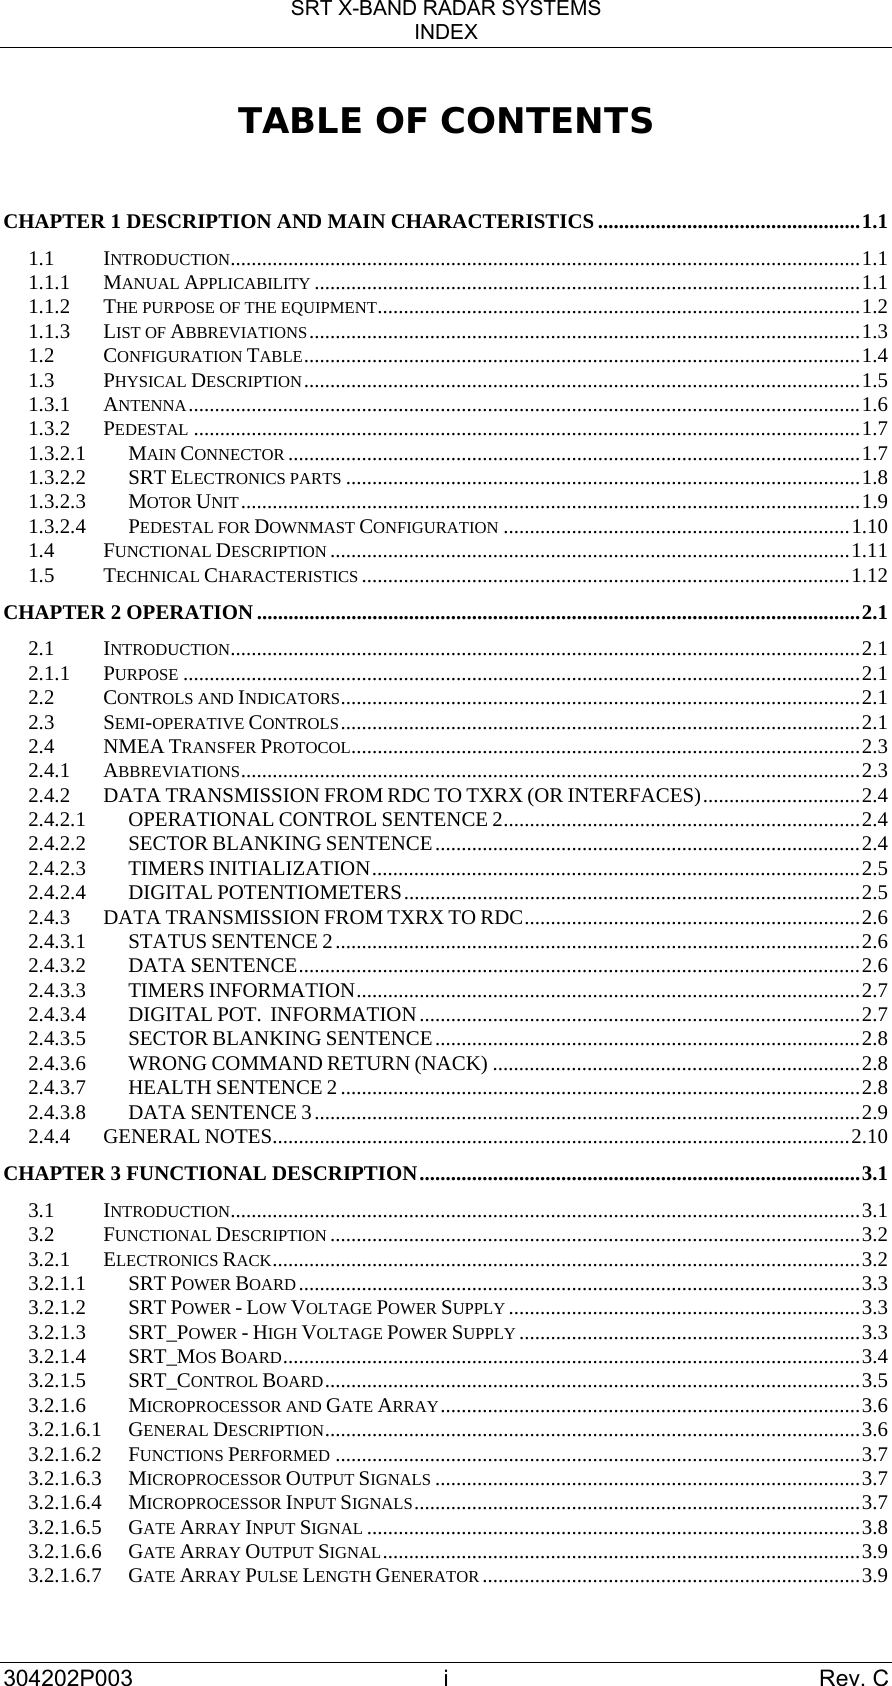 SRT X-BAND RADAR SYSTEMS INDEX 304202P003 i  Rev. C TABLE OF CONTENTS  CHAPTER 1 DESCRIPTION AND MAIN CHARACTERISTICS ..................................................1.1 1.1 INTRODUCTION........................................................................................................................1.1 1.1.1 MANUAL APPLICABILITY ........................................................................................................1.1 1.1.2 THE PURPOSE OF THE EQUIPMENT............................................................................................1.2 1.1.3 LIST OF ABBREVIATIONS.........................................................................................................1.3 1.2 CONFIGURATION TABLE..........................................................................................................1.4 1.3 PHYSICAL DESCRIPTION..........................................................................................................1.5 1.3.1 ANTENNA................................................................................................................................1.6 1.3.2 PEDESTAL ...............................................................................................................................1.7 1.3.2.1 MAIN CONNECTOR .............................................................................................................1.7 1.3.2.2 SRT ELECTRONICS PARTS ..................................................................................................1.8 1.3.2.3 MOTOR UNIT......................................................................................................................1.9 1.3.2.4 PEDESTAL FOR DOWNMAST CONFIGURATION ..................................................................1.10 1.4 FUNCTIONAL DESCRIPTION ...................................................................................................1.11 1.5 TECHNICAL CHARACTERISTICS .............................................................................................1.12 CHAPTER 2 OPERATION ...................................................................................................................2.1 2.1 INTRODUCTION........................................................................................................................2.1 2.1.1 PURPOSE .................................................................................................................................2.1 2.2 CONTROLS AND INDICATORS...................................................................................................2.1 2.3 SEMI-OPERATIVE CONTROLS...................................................................................................2.1 2.4 NMEA TRANSFER PROTOCOL.................................................................................................2.3 2.4.1 ABBREVIATIONS......................................................................................................................2.3 2.4.2 DATA TRANSMISSION FROM RDC TO TXRX (OR INTERFACES)..............................2.4 2.4.2.1 OPERATIONAL CONTROL SENTENCE 2....................................................................2.4 2.4.2.2 SECTOR BLANKING SENTENCE.................................................................................2.4 2.4.2.3 TIMERS INITIALIZATION.............................................................................................2.5 2.4.2.4 DIGITAL POTENTIOMETERS.......................................................................................2.5 2.4.3 DATA TRANSMISSION FROM TXRX TO RDC................................................................2.6 2.4.3.1 STATUS SENTENCE 2....................................................................................................2.6 2.4.3.2 DATA SENTENCE...........................................................................................................2.6 2.4.3.3 TIMERS INFORMATION................................................................................................2.7 2.4.3.4 DIGITAL POT.  INFORMATION....................................................................................2.7 2.4.3.5 SECTOR BLANKING SENTENCE.................................................................................2.8 2.4.3.6 WRONG COMMAND RETURN (NACK) ......................................................................2.8 2.4.3.7 HEALTH SENTENCE 2...................................................................................................2.8 2.4.3.8 DATA SENTENCE 3........................................................................................................2.9 2.4.4 GENERAL NOTES..............................................................................................................2.10 CHAPTER 3 FUNCTIONAL DESCRIPTION....................................................................................3.1 3.1 INTRODUCTION........................................................................................................................3.1 3.2 FUNCTIONAL DESCRIPTION .....................................................................................................3.2 3.2.1 ELECTRONICS RACK................................................................................................................3.2 3.2.1.1 SRT POWER BOARD...........................................................................................................3.3 3.2.1.2 SRT POWER - LOW VOLTAGE POWER SUPPLY ...................................................................3.3 3.2.1.3 SRT_POWER - HIGH VOLTAGE POWER SUPPLY .................................................................3.3 3.2.1.4 SRT_MOS BOARD..............................................................................................................3.4 3.2.1.5 SRT_CONTROL BOARD......................................................................................................3.5 3.2.1.6 MICROPROCESSOR AND GATE ARRAY................................................................................3.6 3.2.1.6.1 GENERAL DESCRIPTION......................................................................................................3.6 3.2.1.6.2 FUNCTIONS PERFORMED ....................................................................................................3.7 3.2.1.6.3 MICROPROCESSOR OUTPUT SIGNALS .................................................................................3.7 3.2.1.6.4 MICROPROCESSOR INPUT SIGNALS.....................................................................................3.7 3.2.1.6.5 GATE ARRAY INPUT SIGNAL ..............................................................................................3.8 3.2.1.6.6 GATE ARRAY OUTPUT SIGNAL...........................................................................................3.9 3.2.1.6.7 GATE ARRAY PULSE LENGTH GENERATOR ........................................................................3.9 